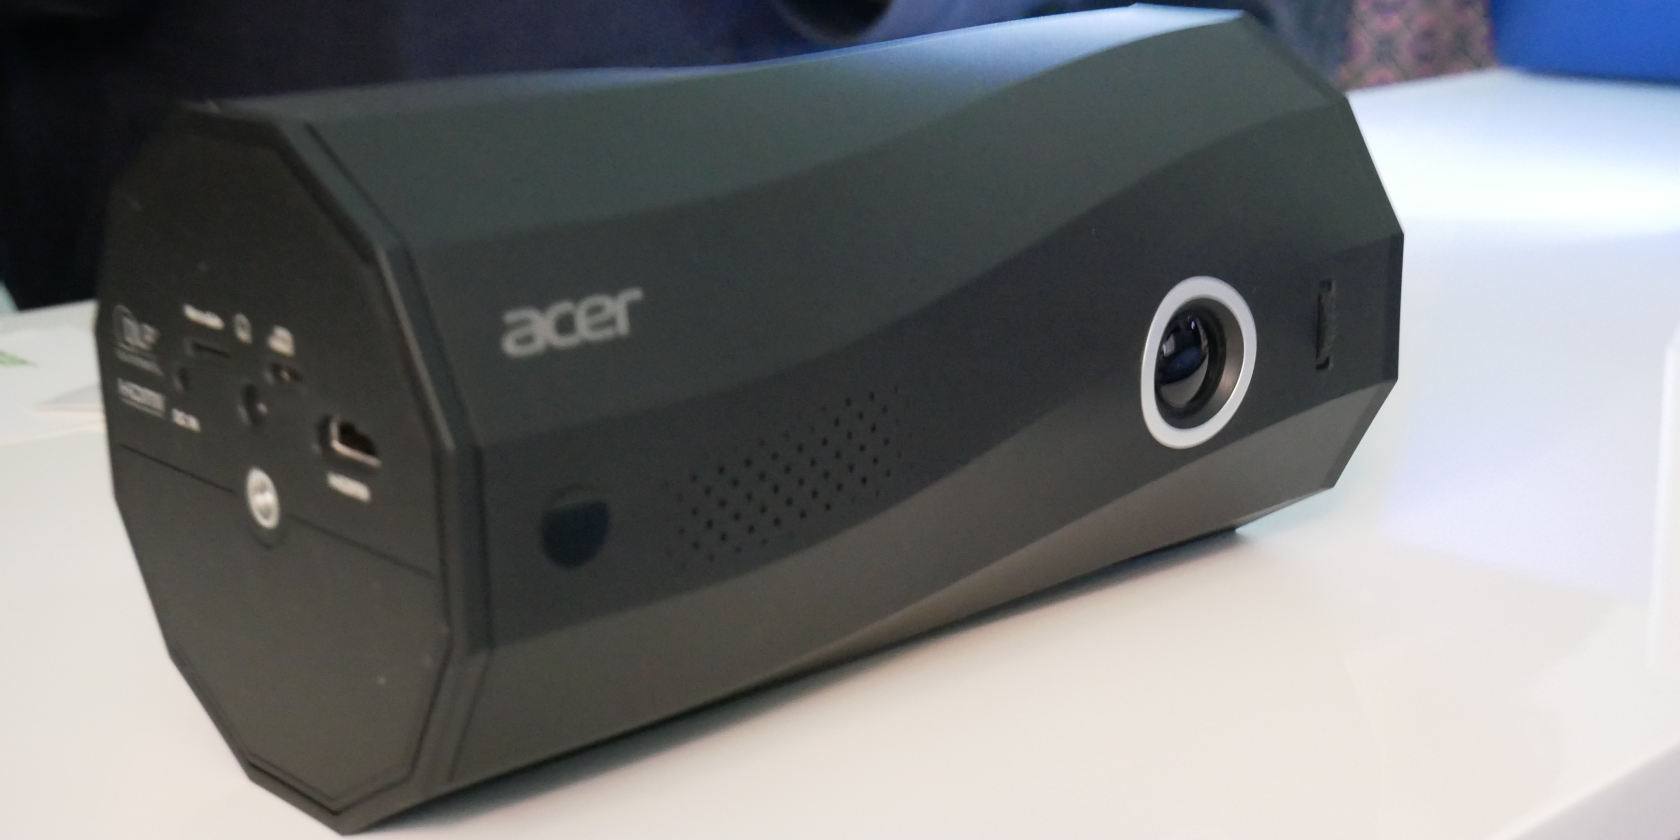 Acer C250i portable wireless LED projector and speaker